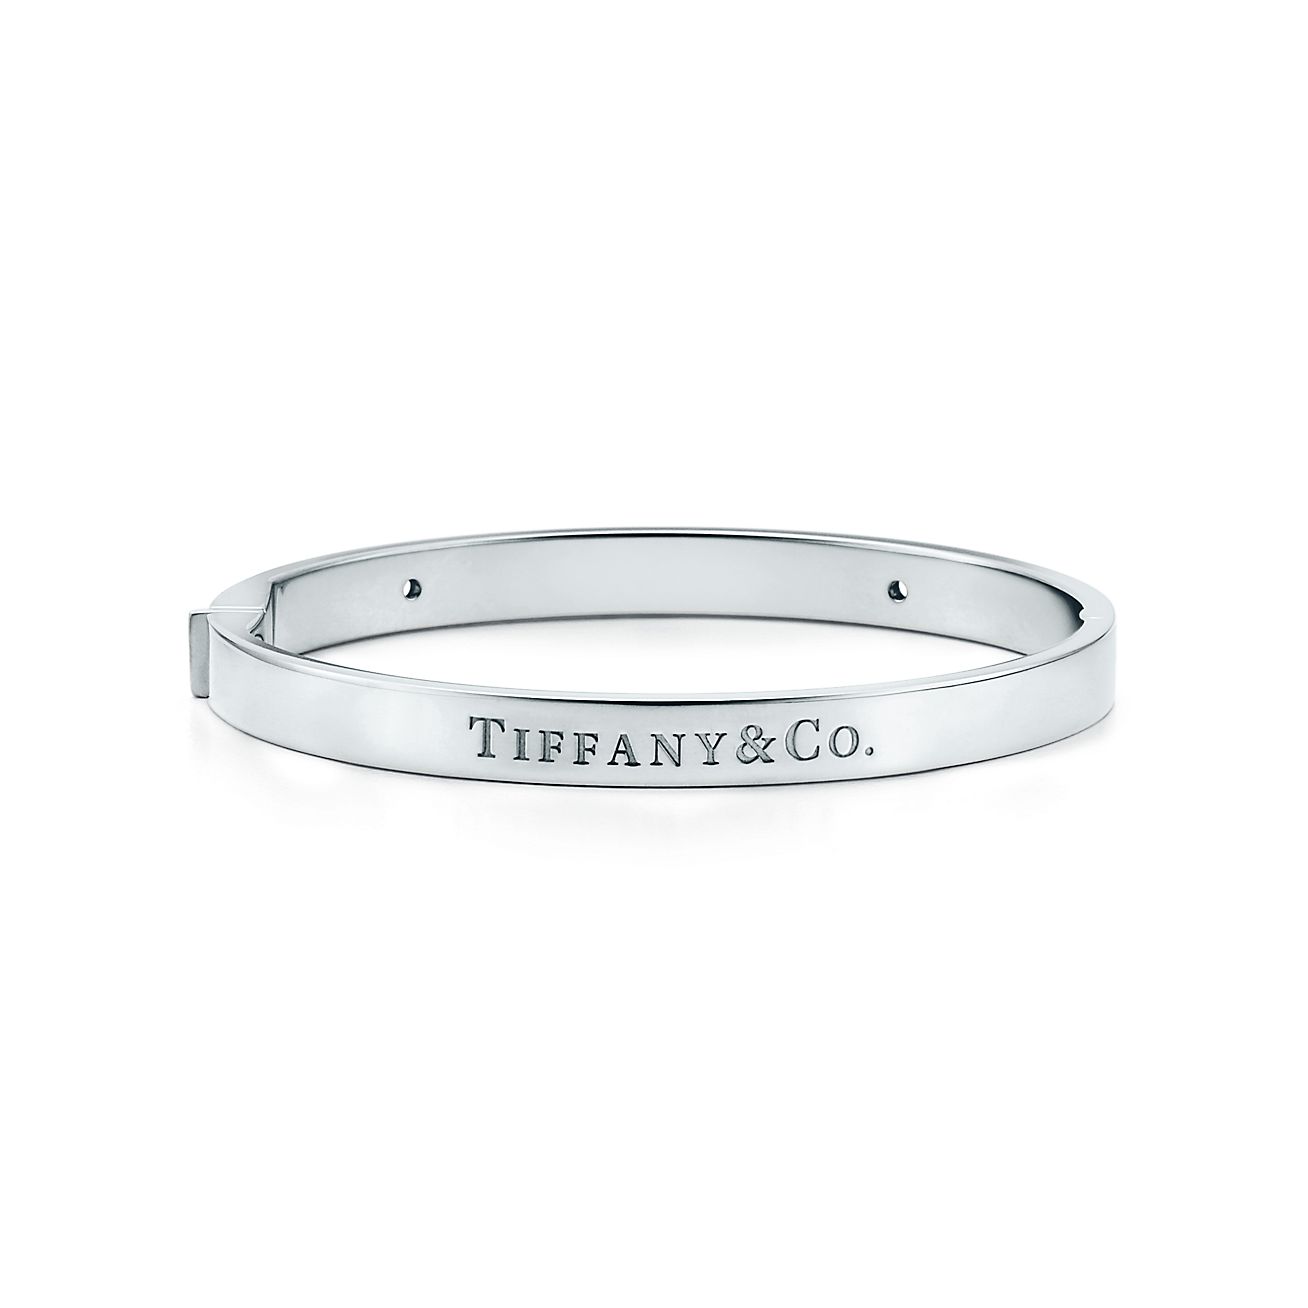 Hinged bangle in 18k white gold with 